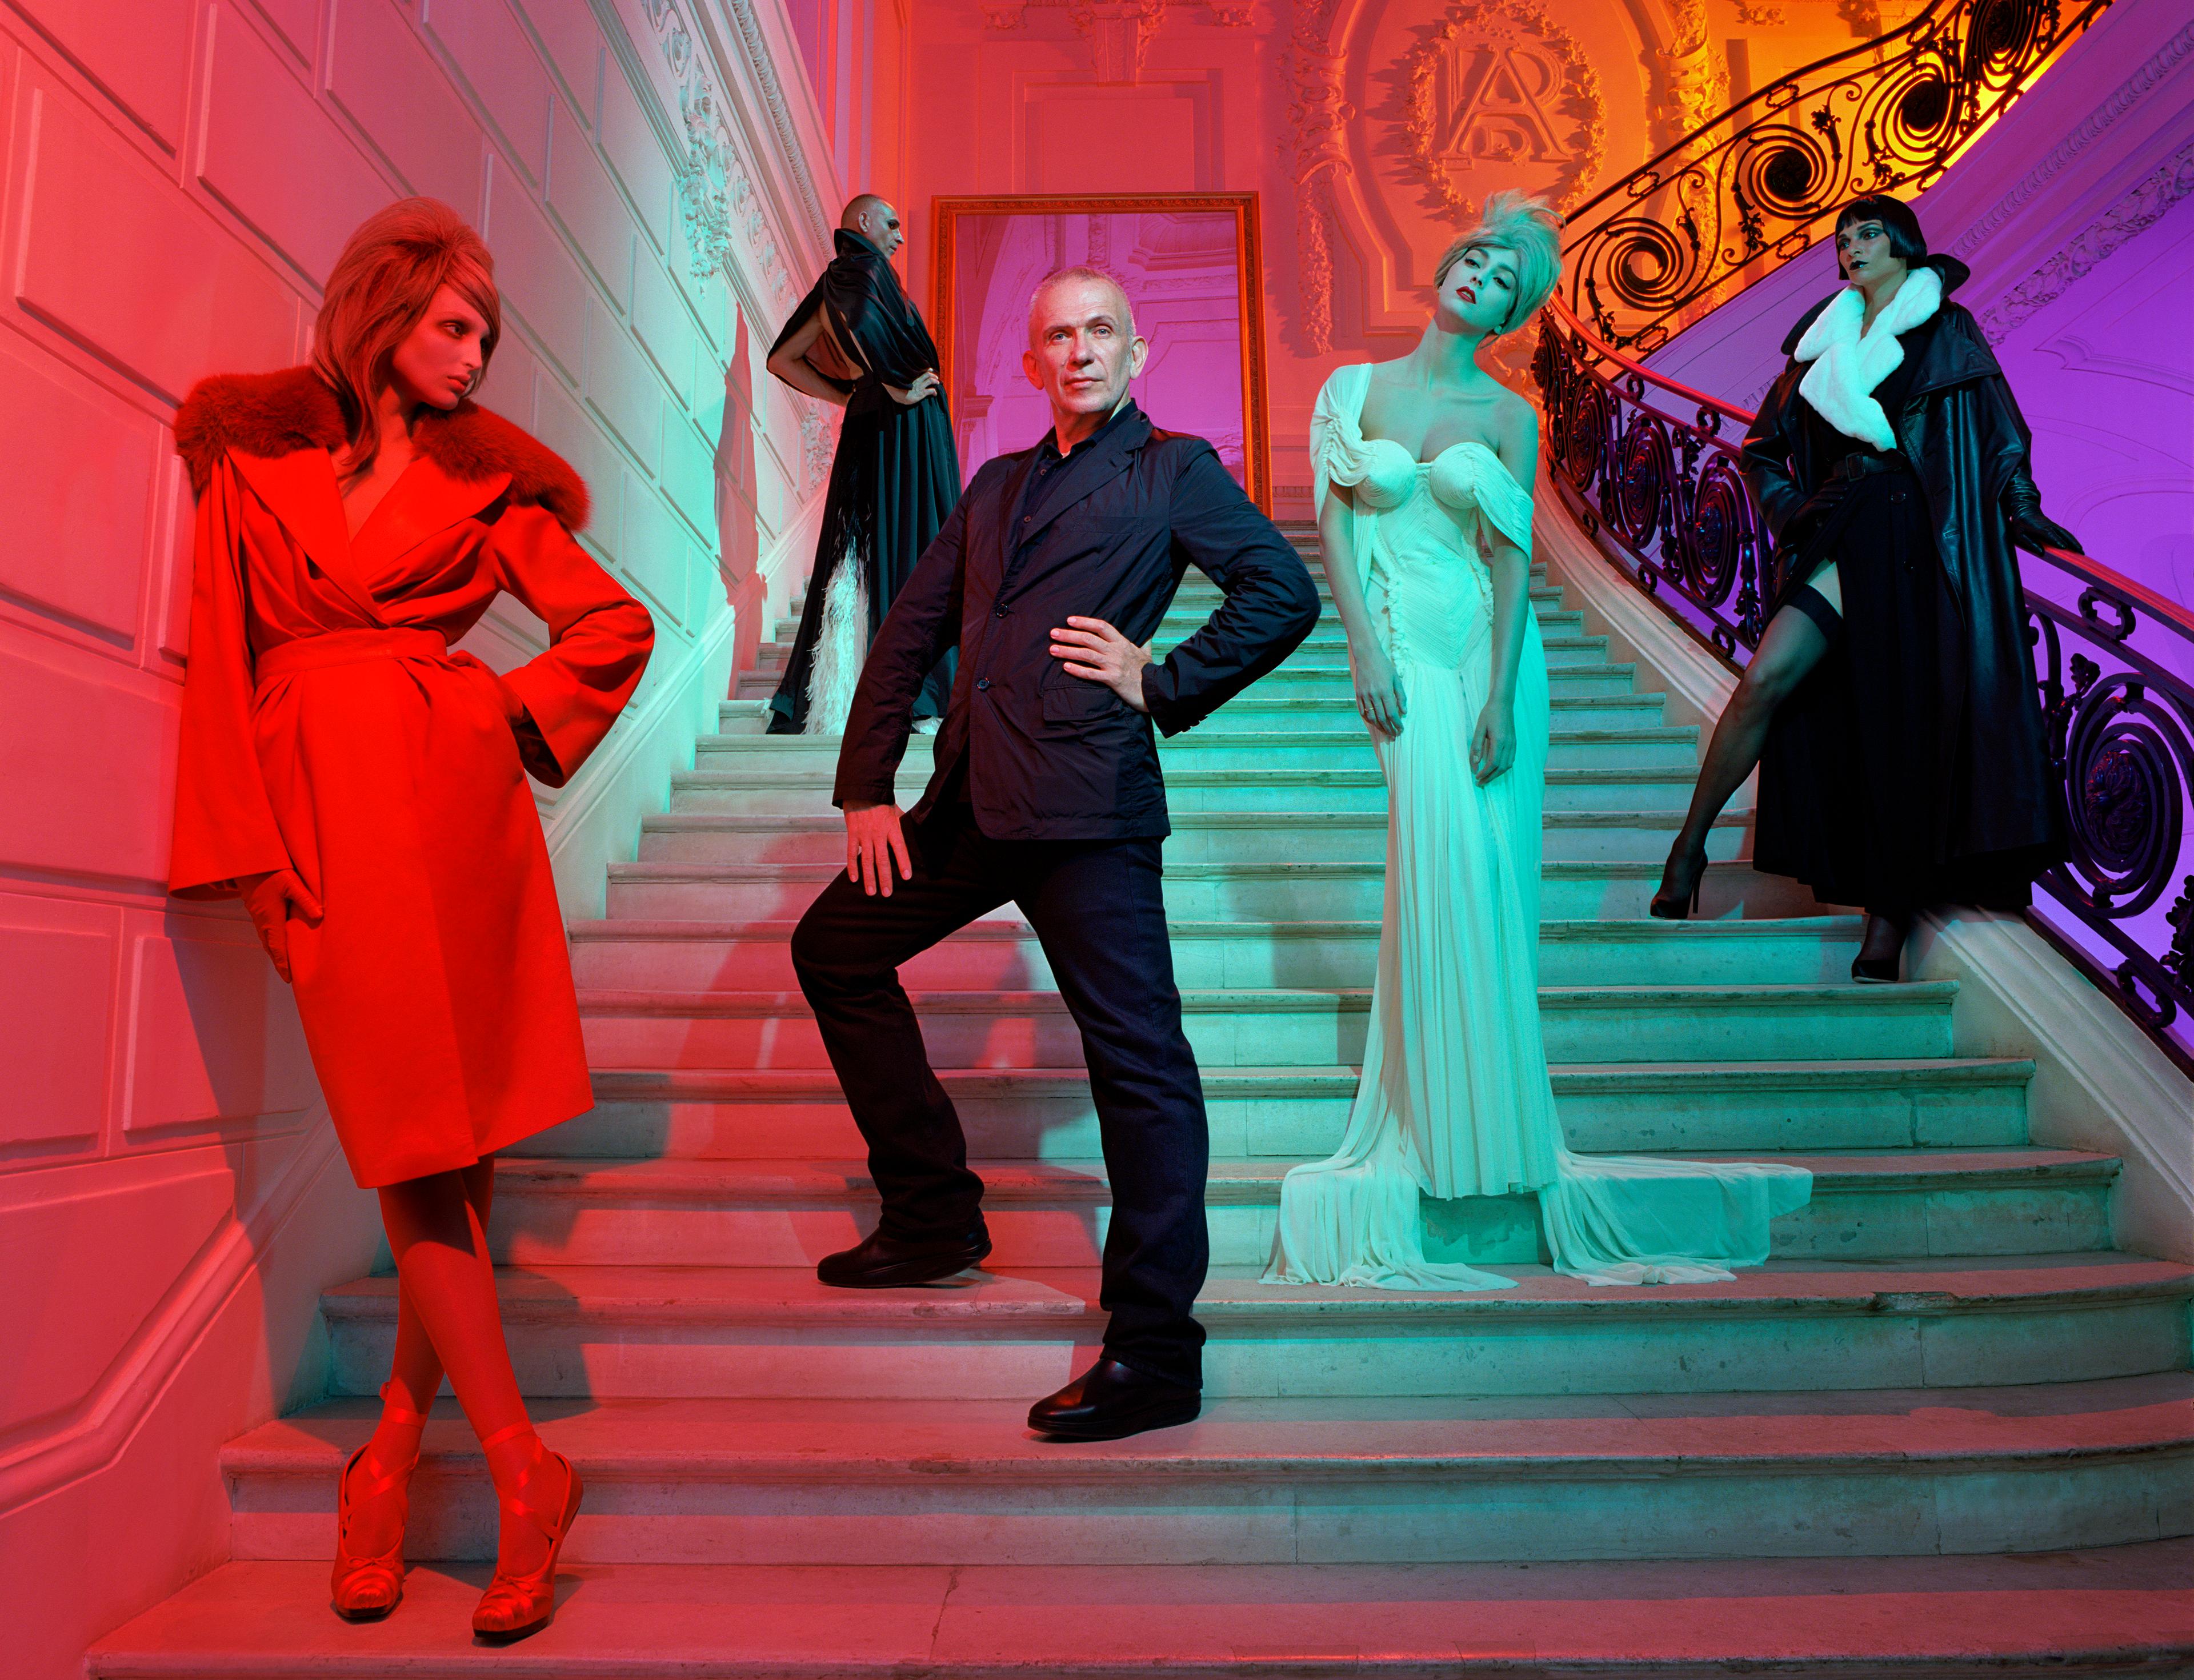 Jean Paul Gaultier standing in the middle surrounded by people wearing designer clothes.